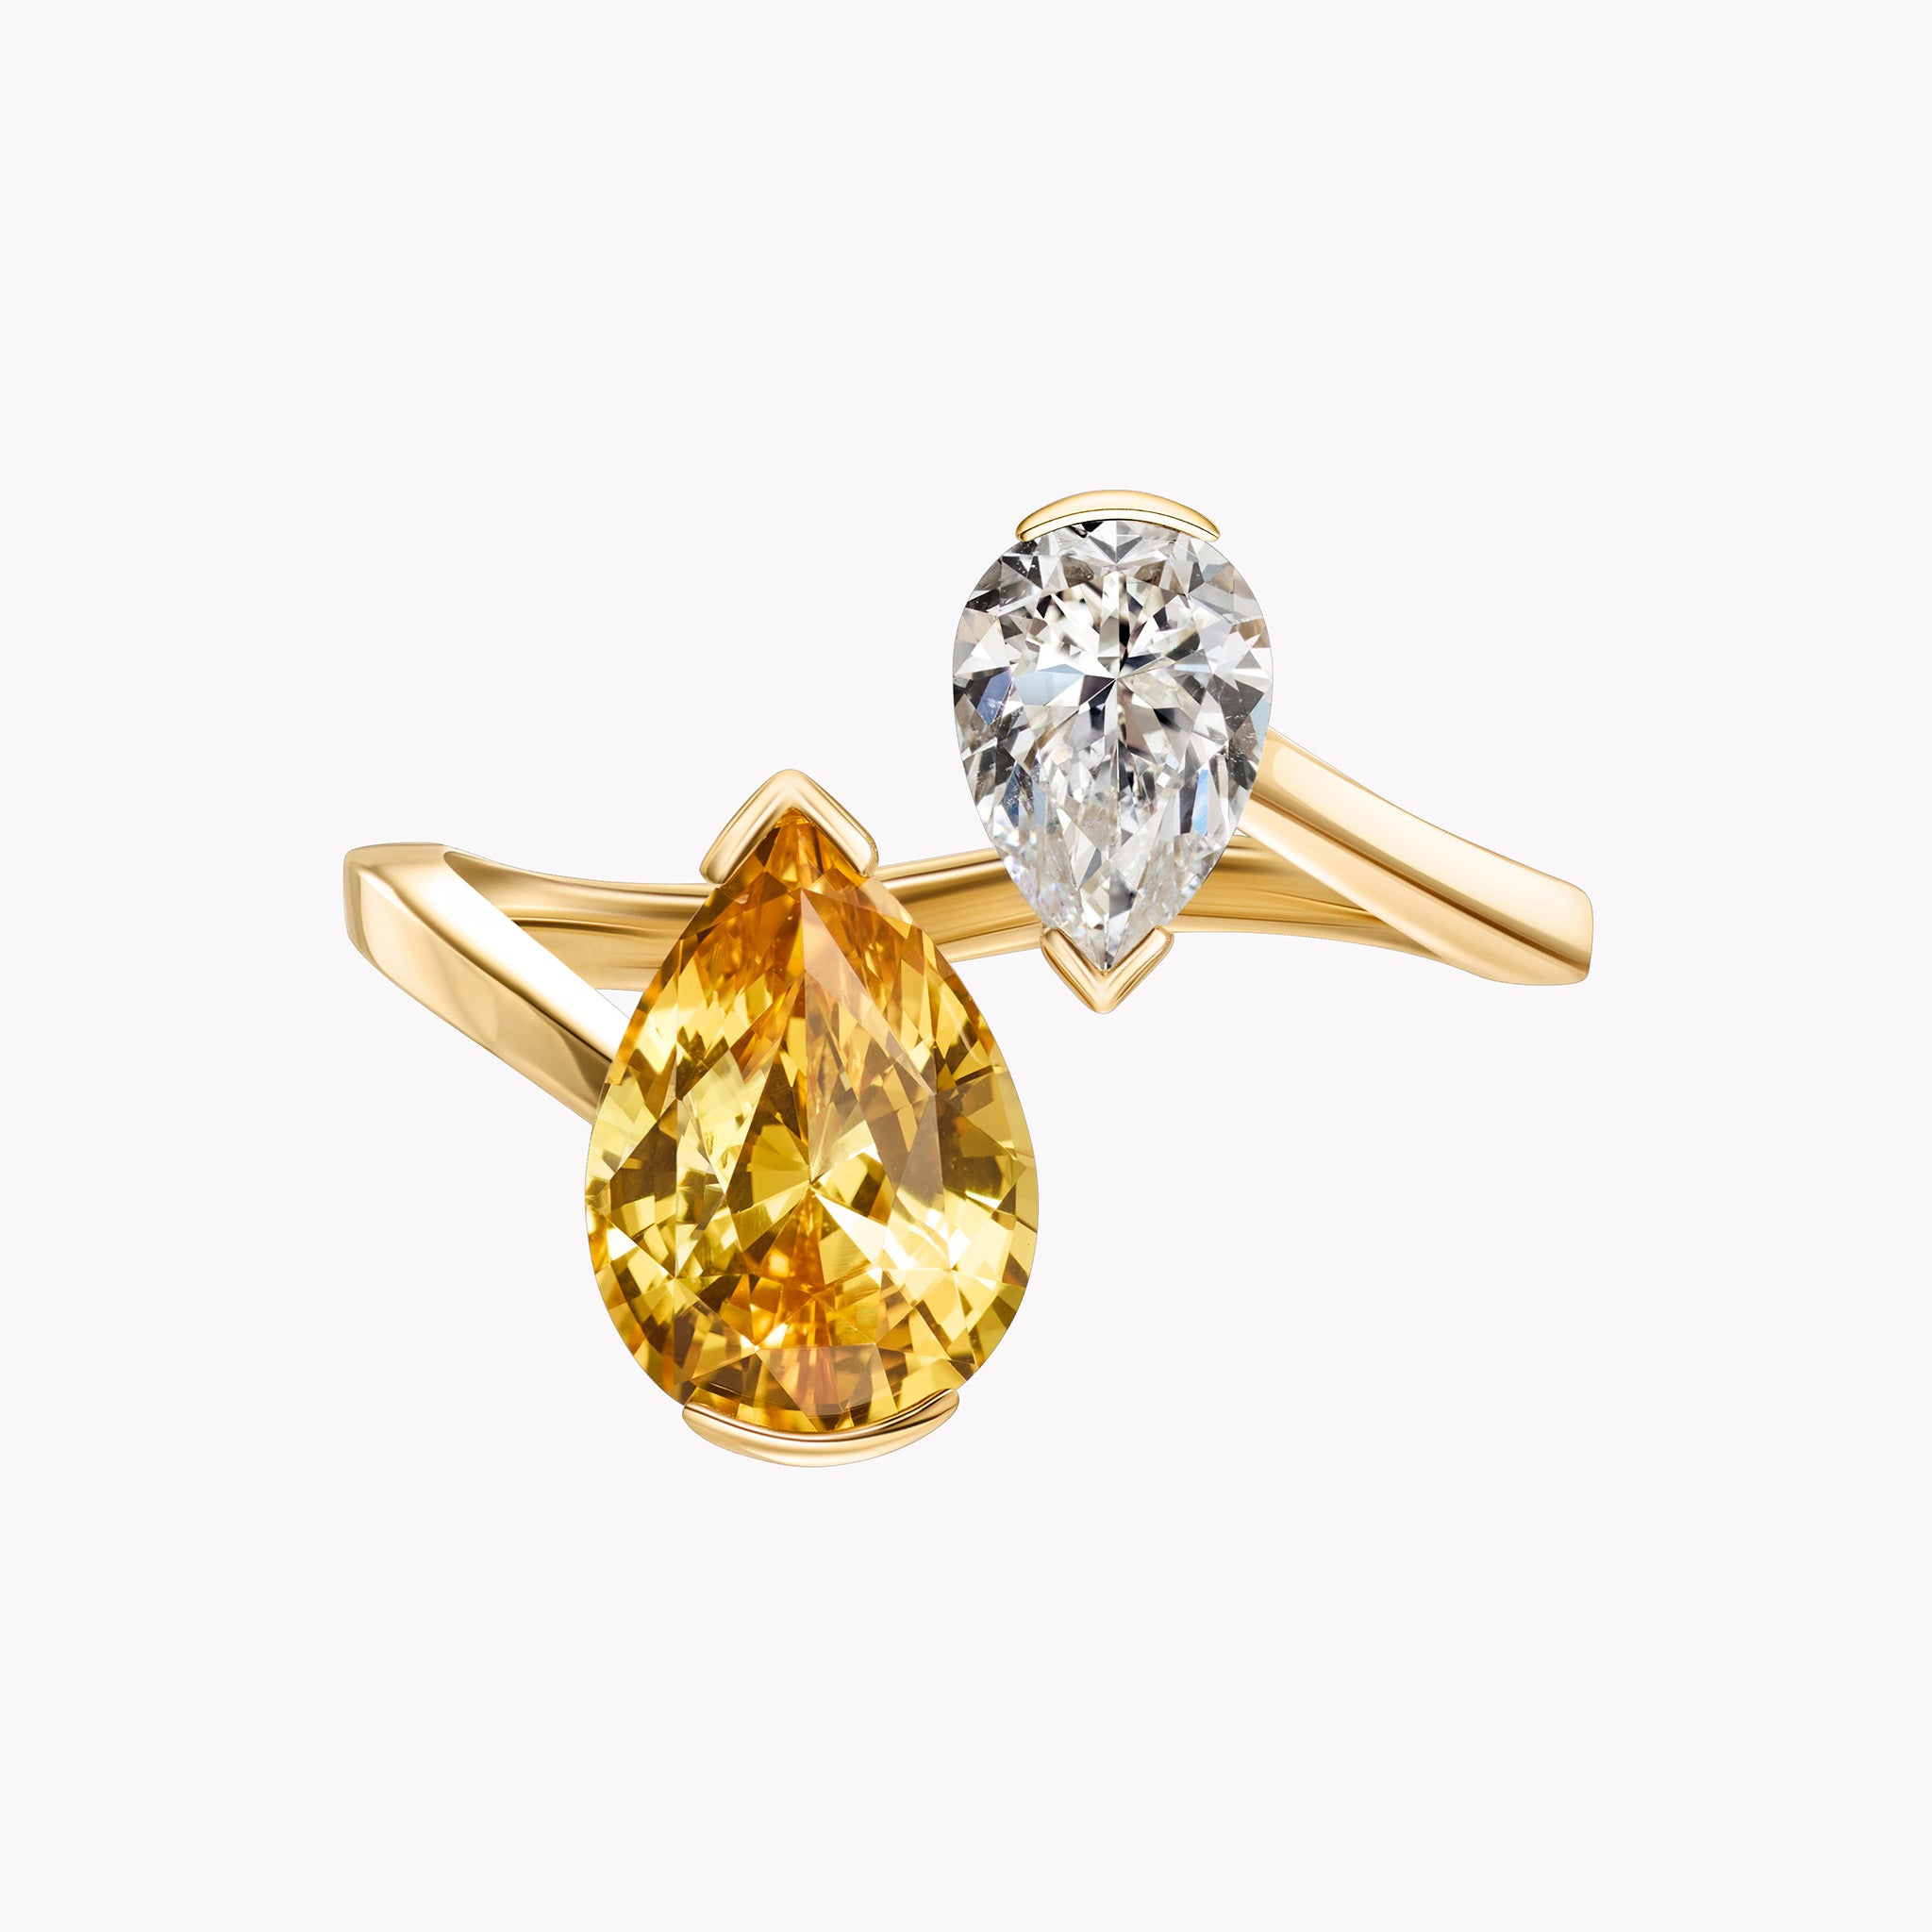 The Daphne Yellow Sapphire and Diamond Ring